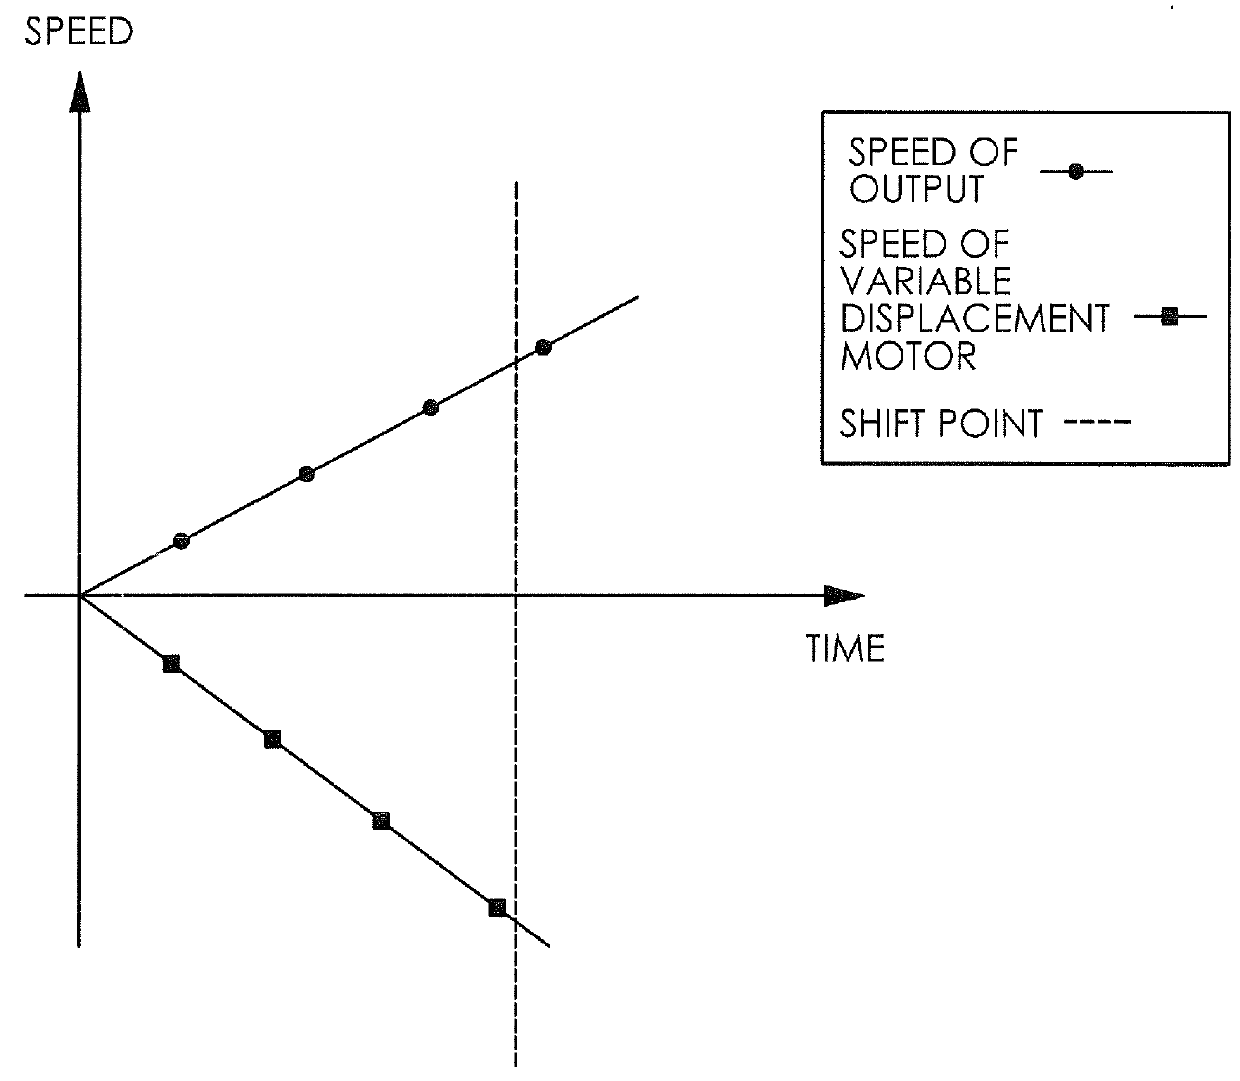 Shifting procedure for powersplit systems